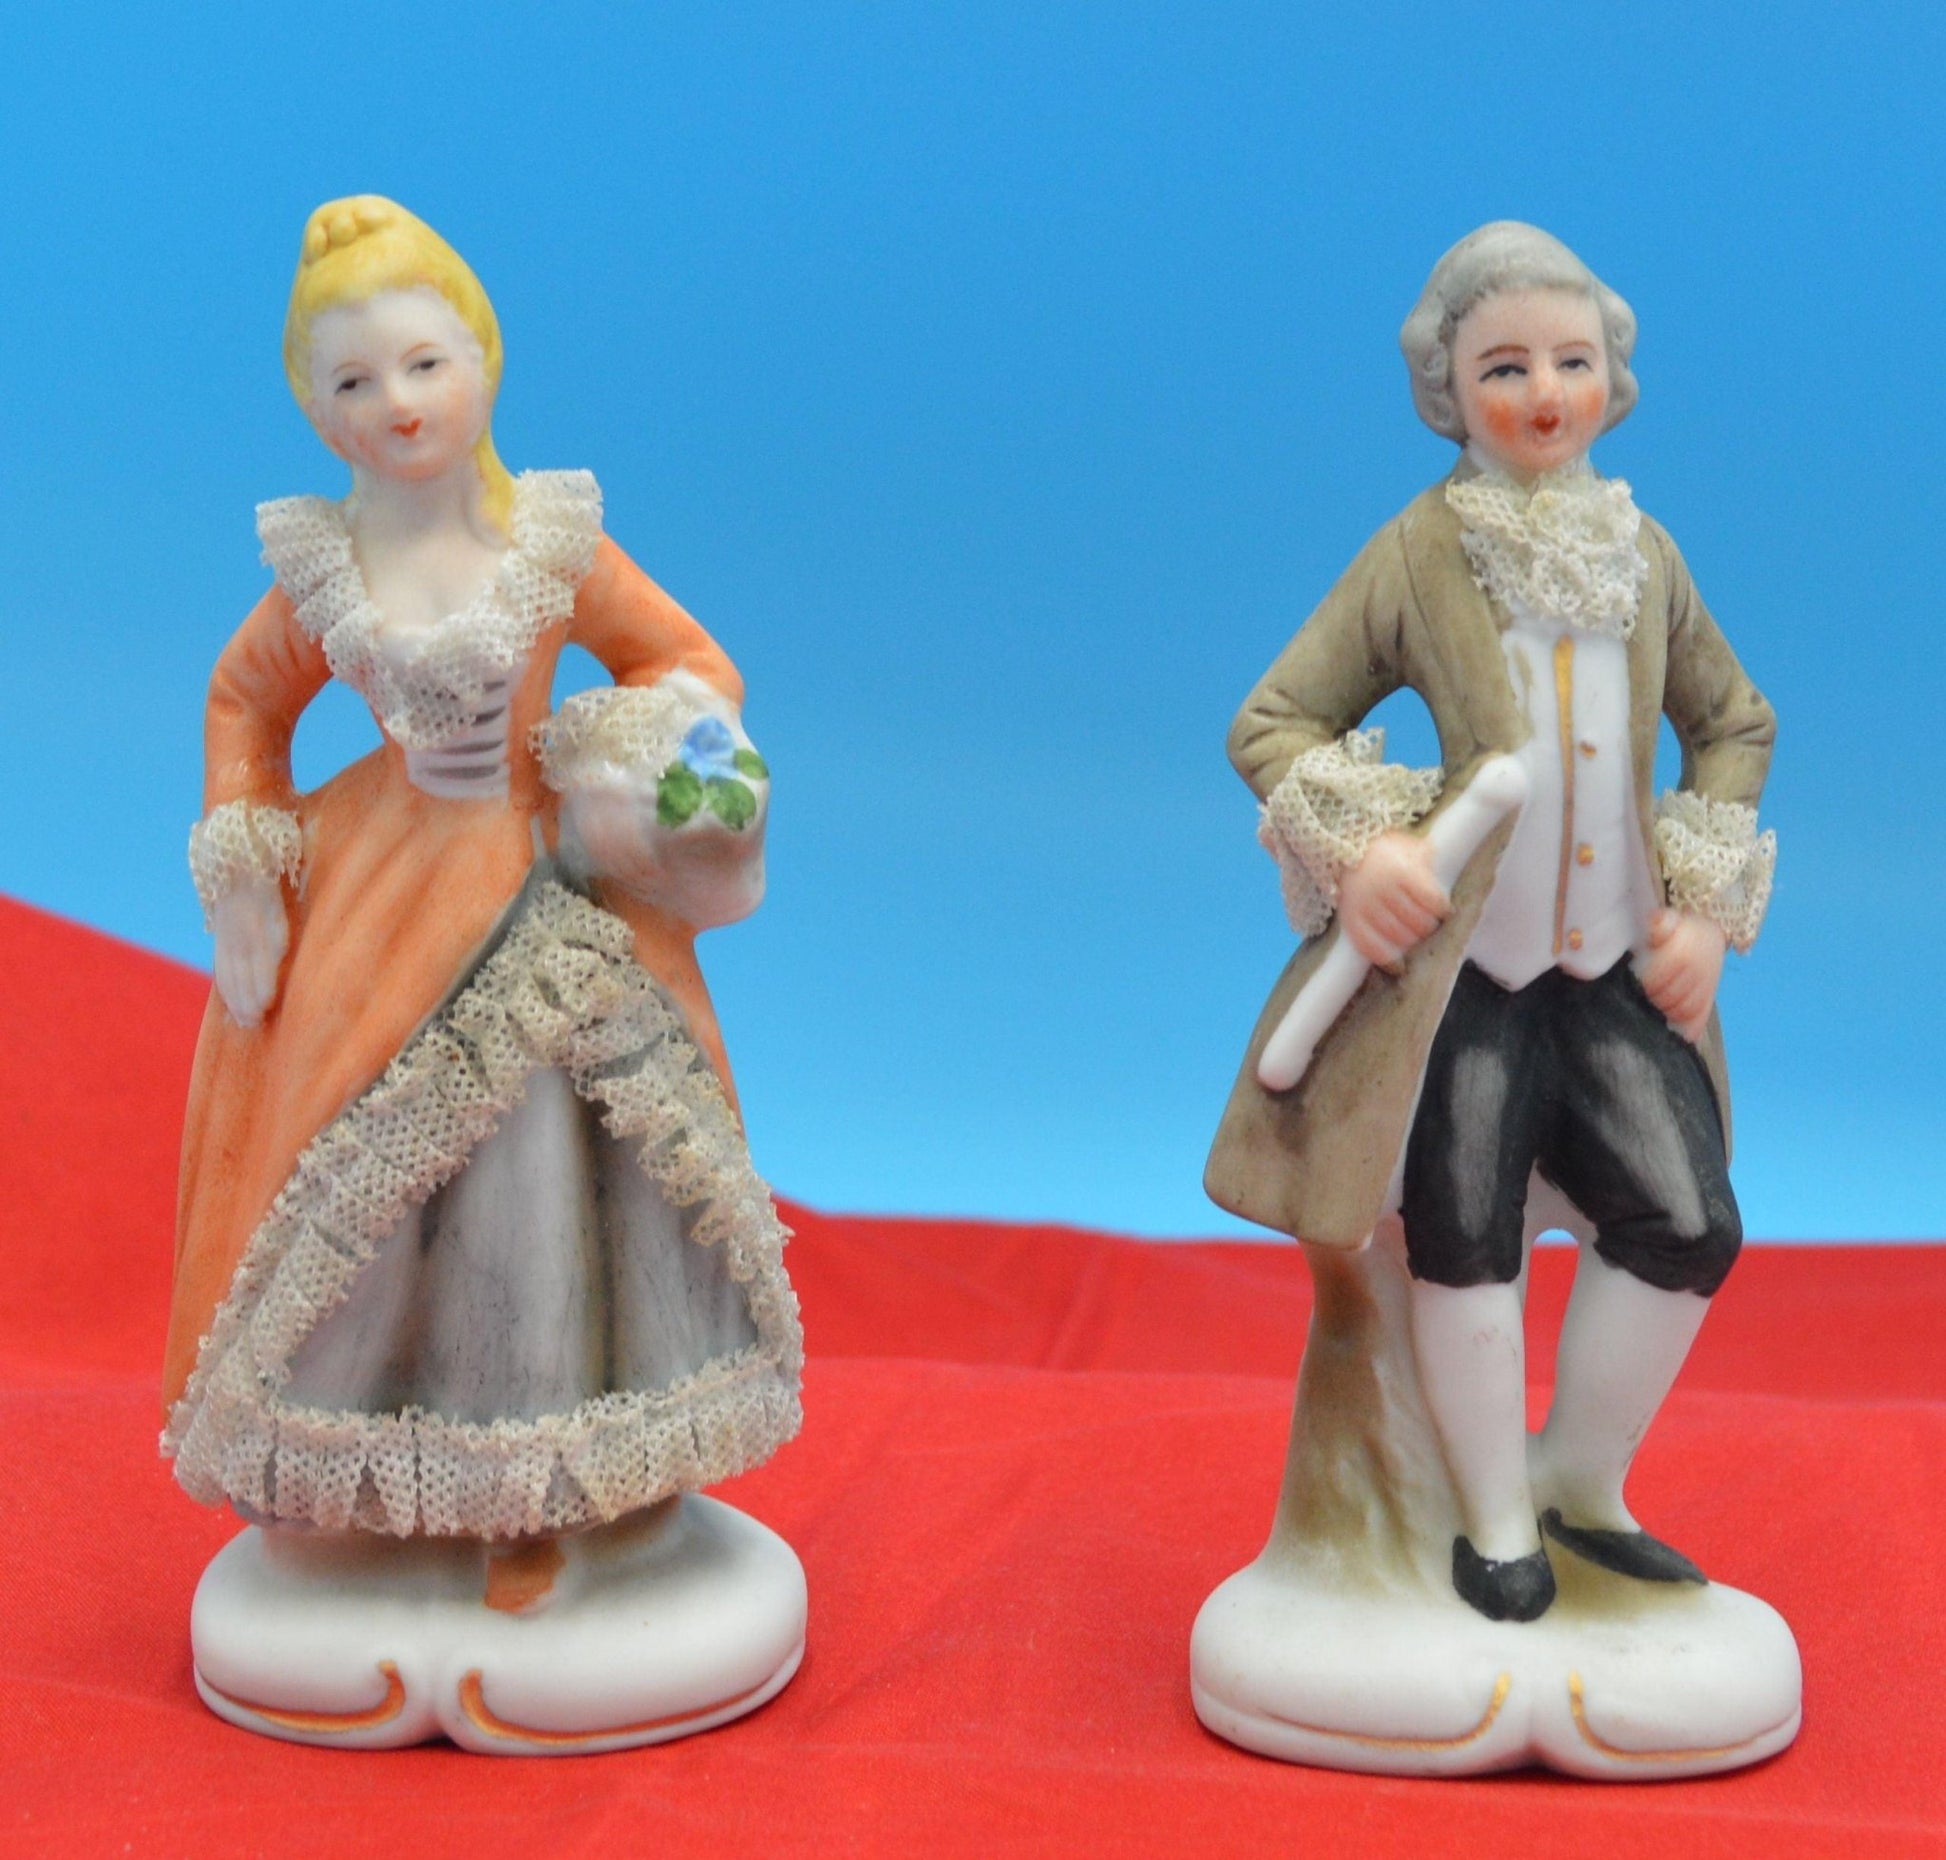 DECORATIVE FIGURINES A PAIR OF PERIOD STYLE FIGURINES - TMD167207